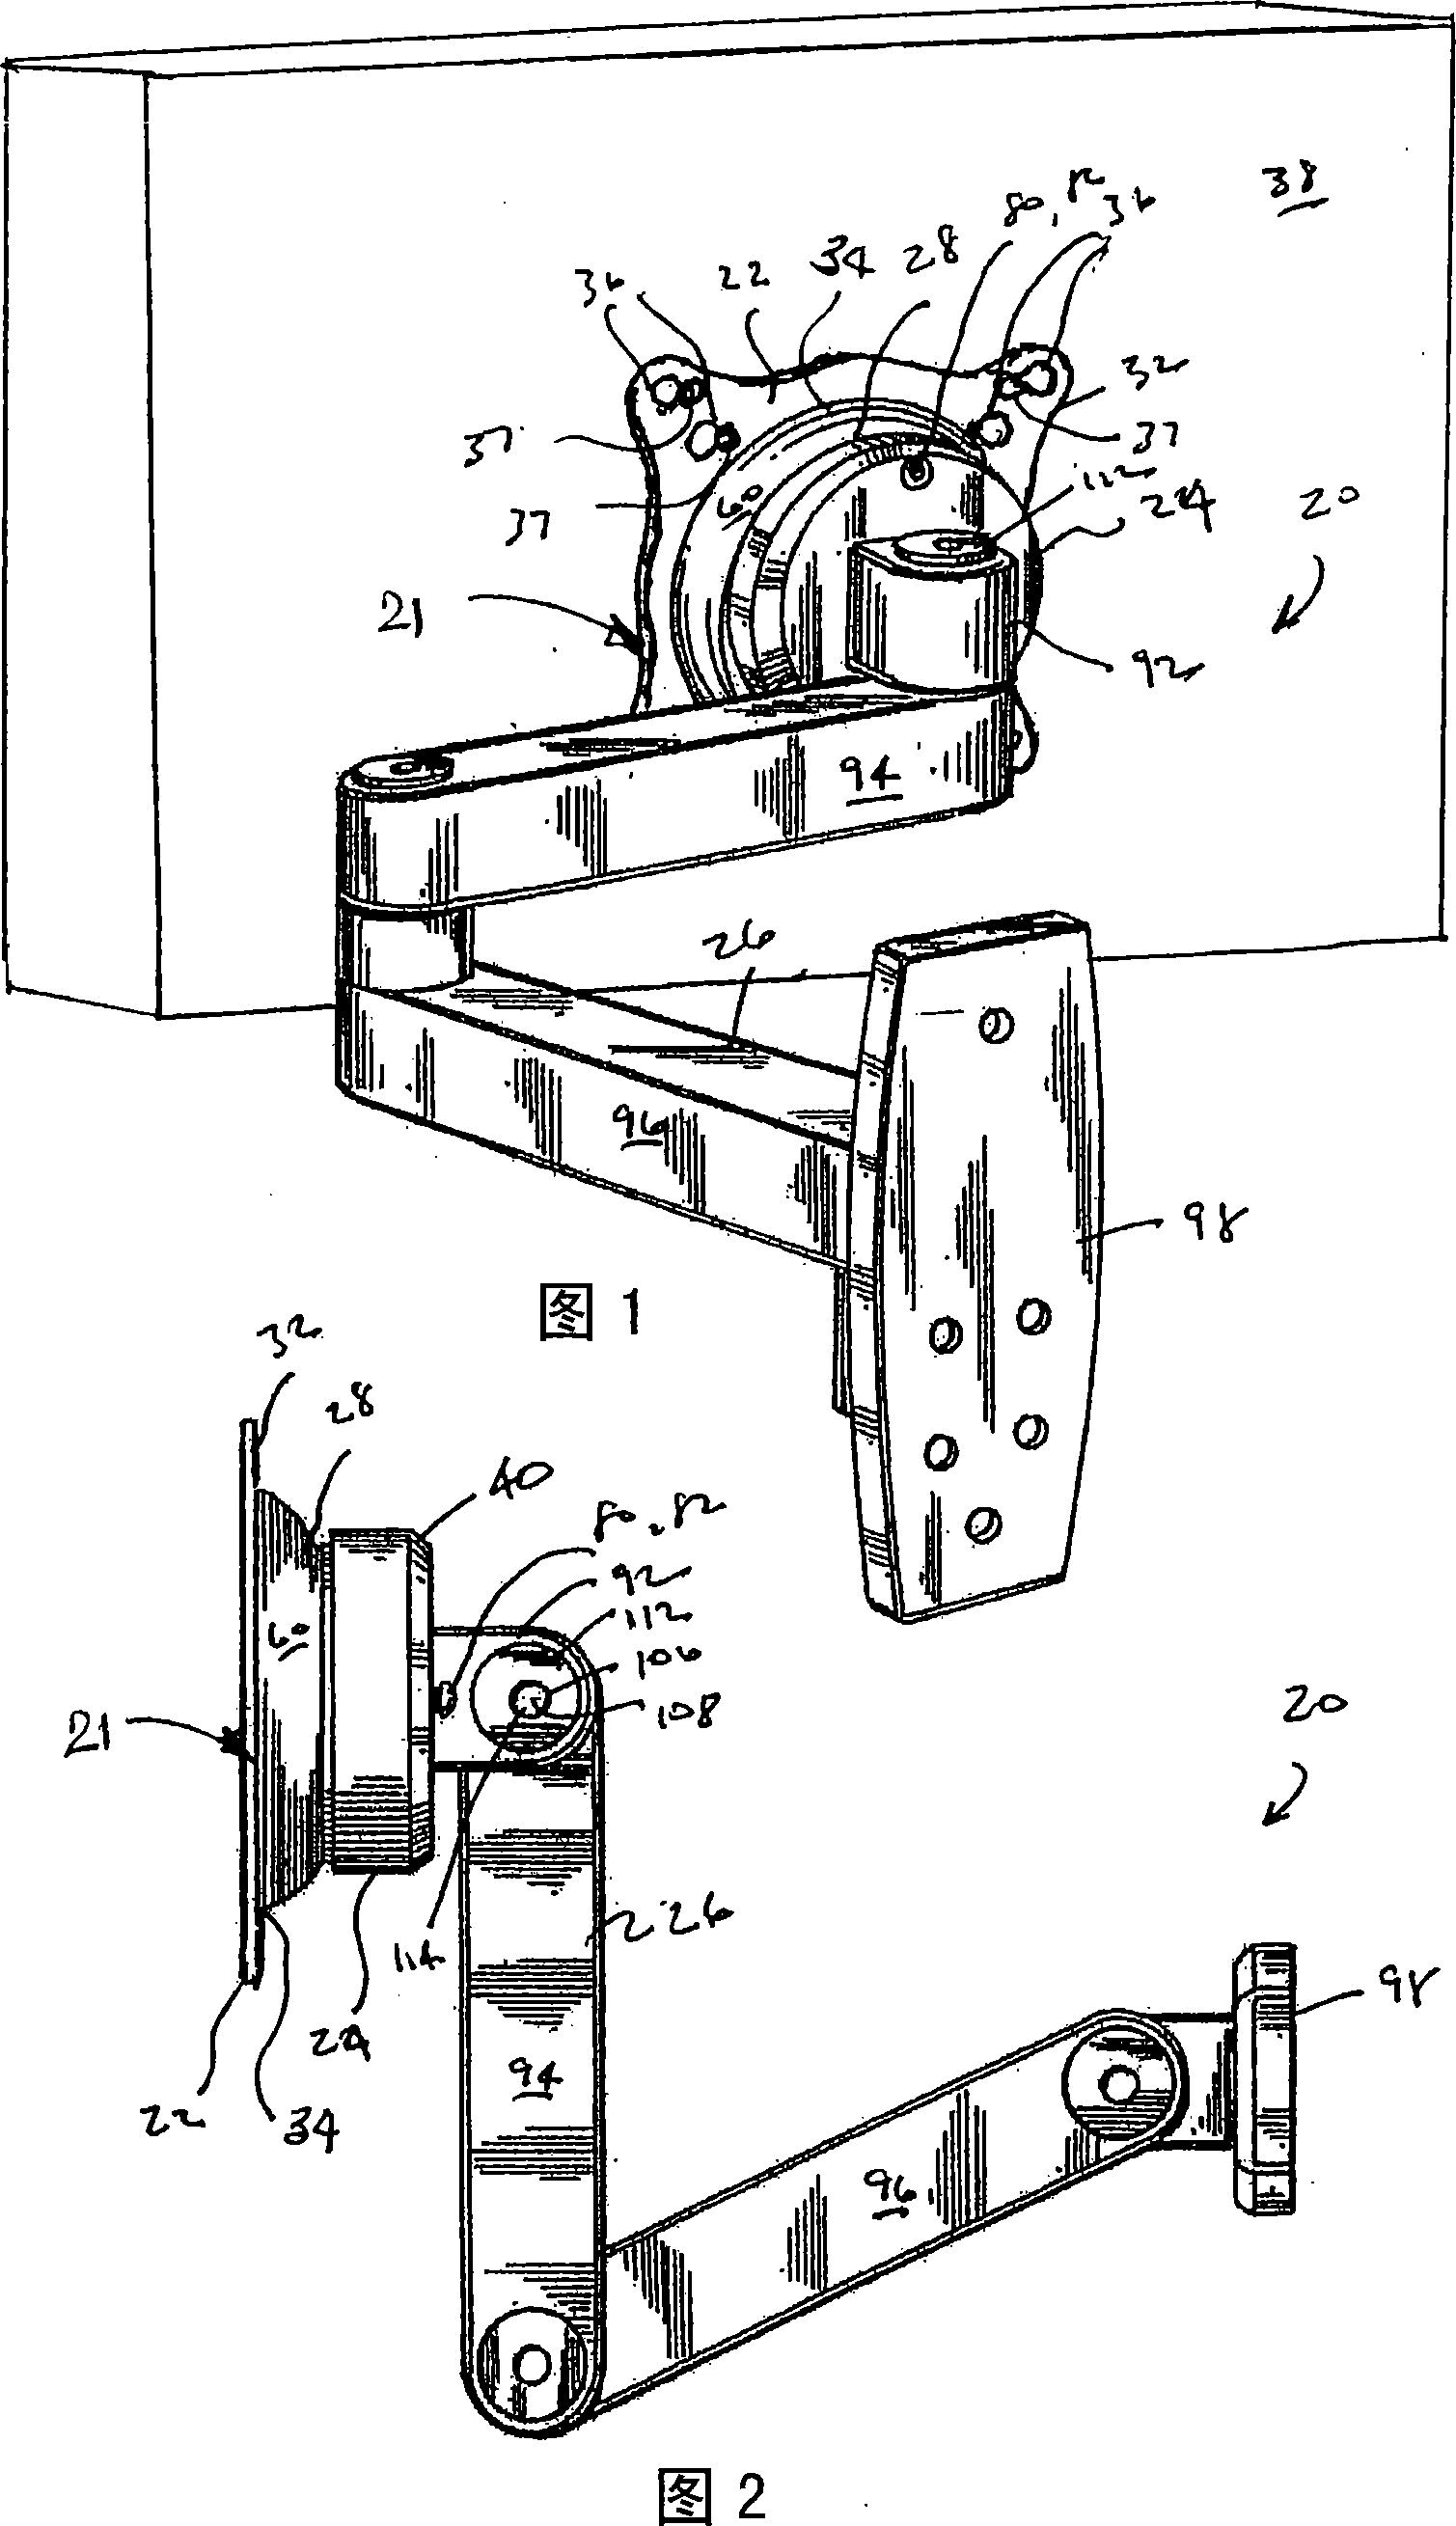 Mounting system for flat panel electronic display